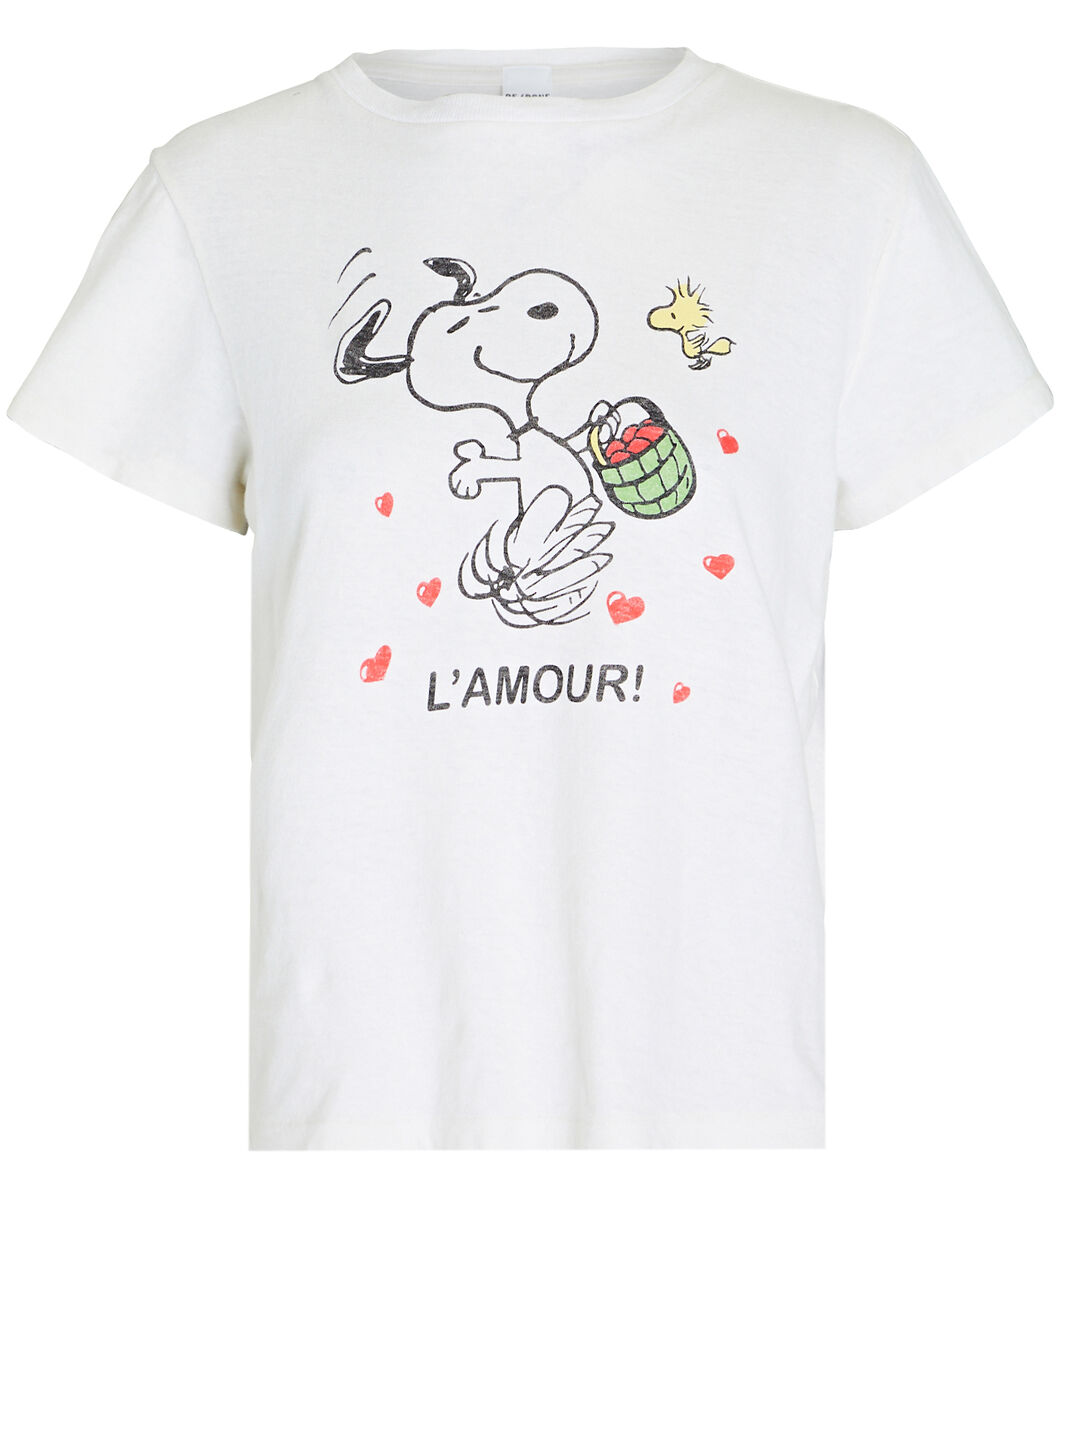 Lamour Snoopy Classic Graphic T-Shirt